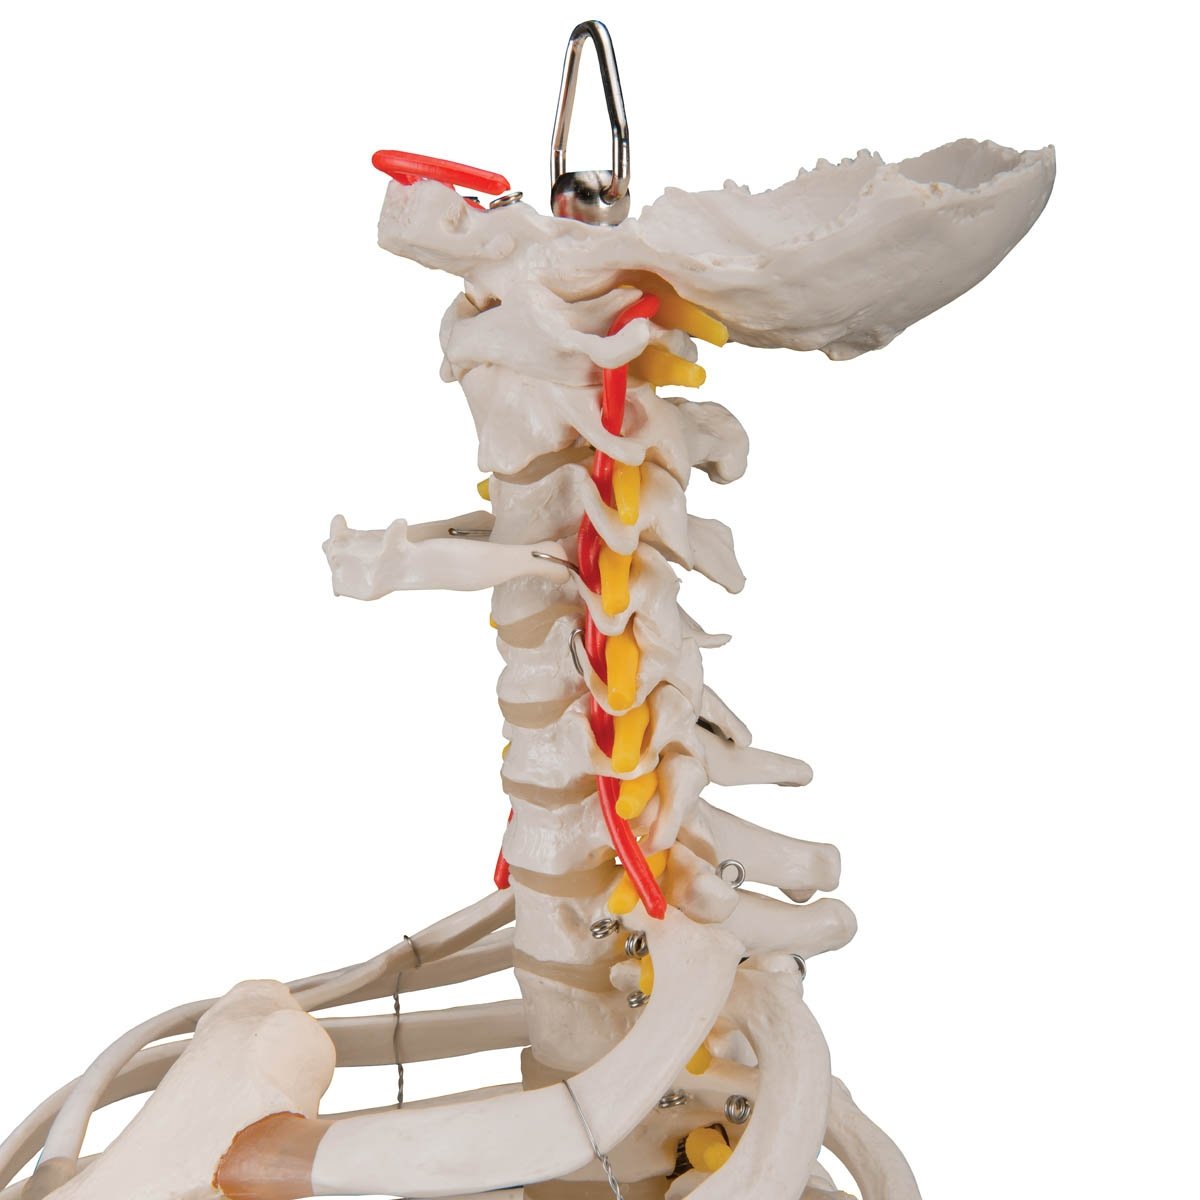 3B Scientific A56-2 Classic Flexible Spine with Ribs and Femur Heads